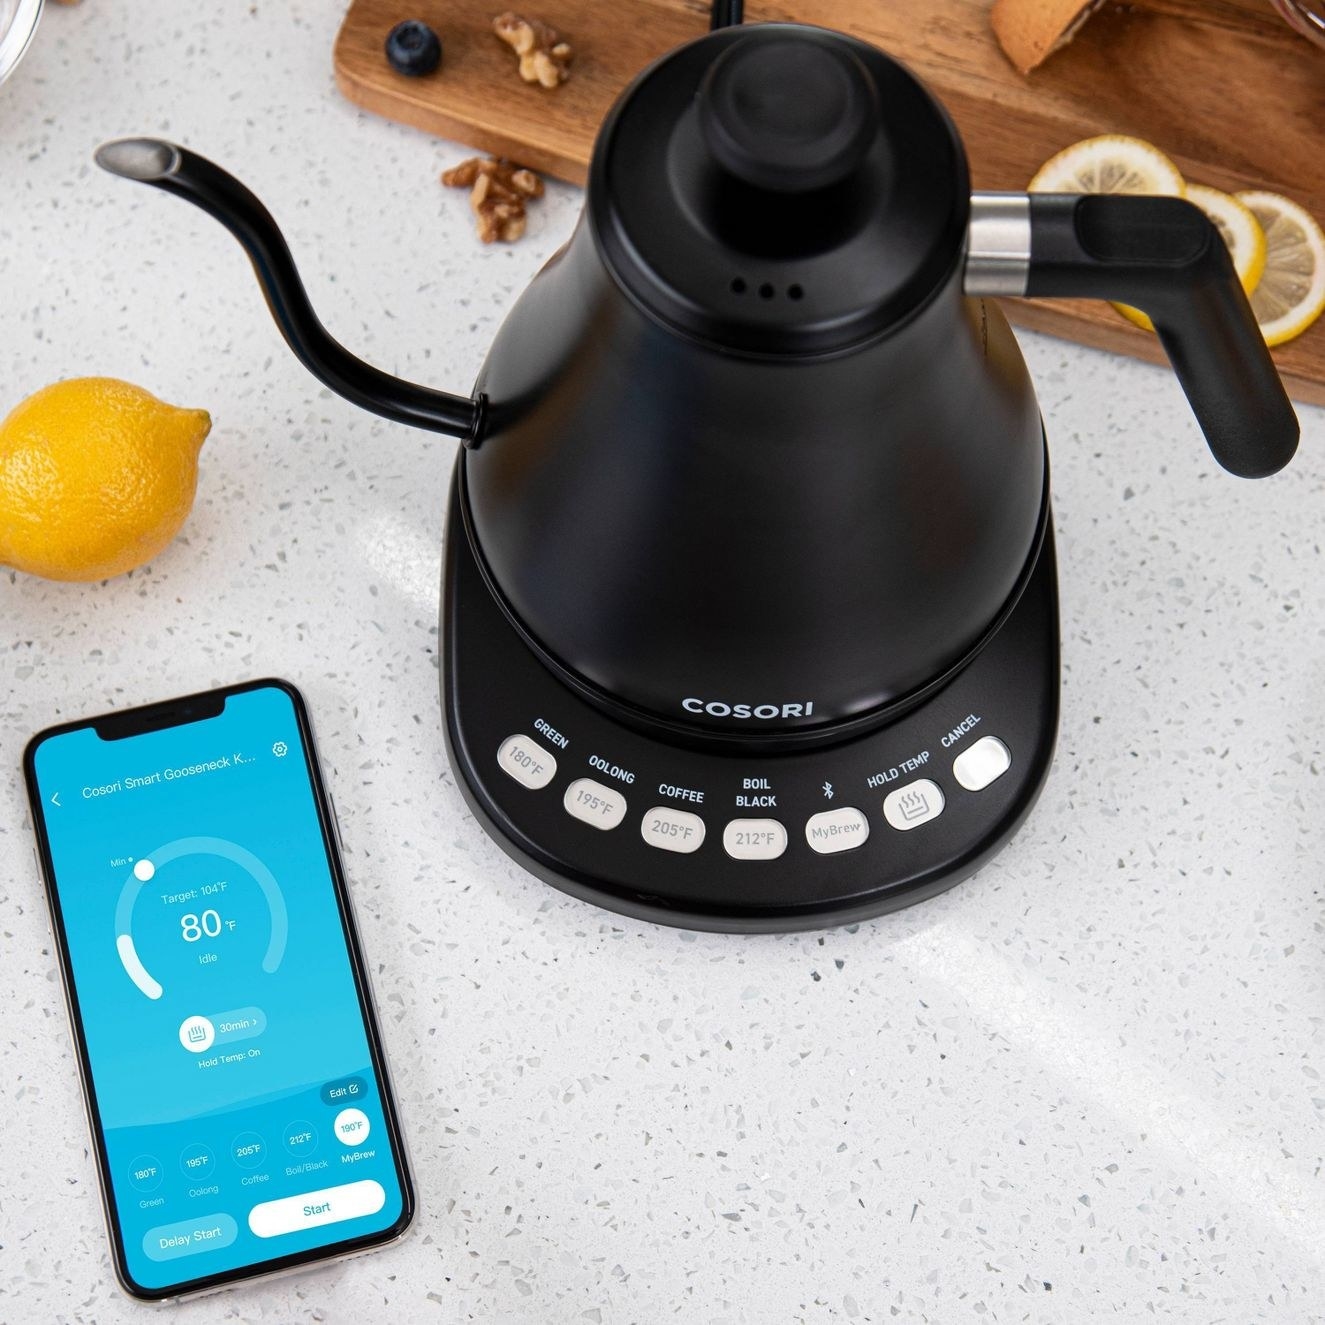 The kettle with a Smartphone app open next to it